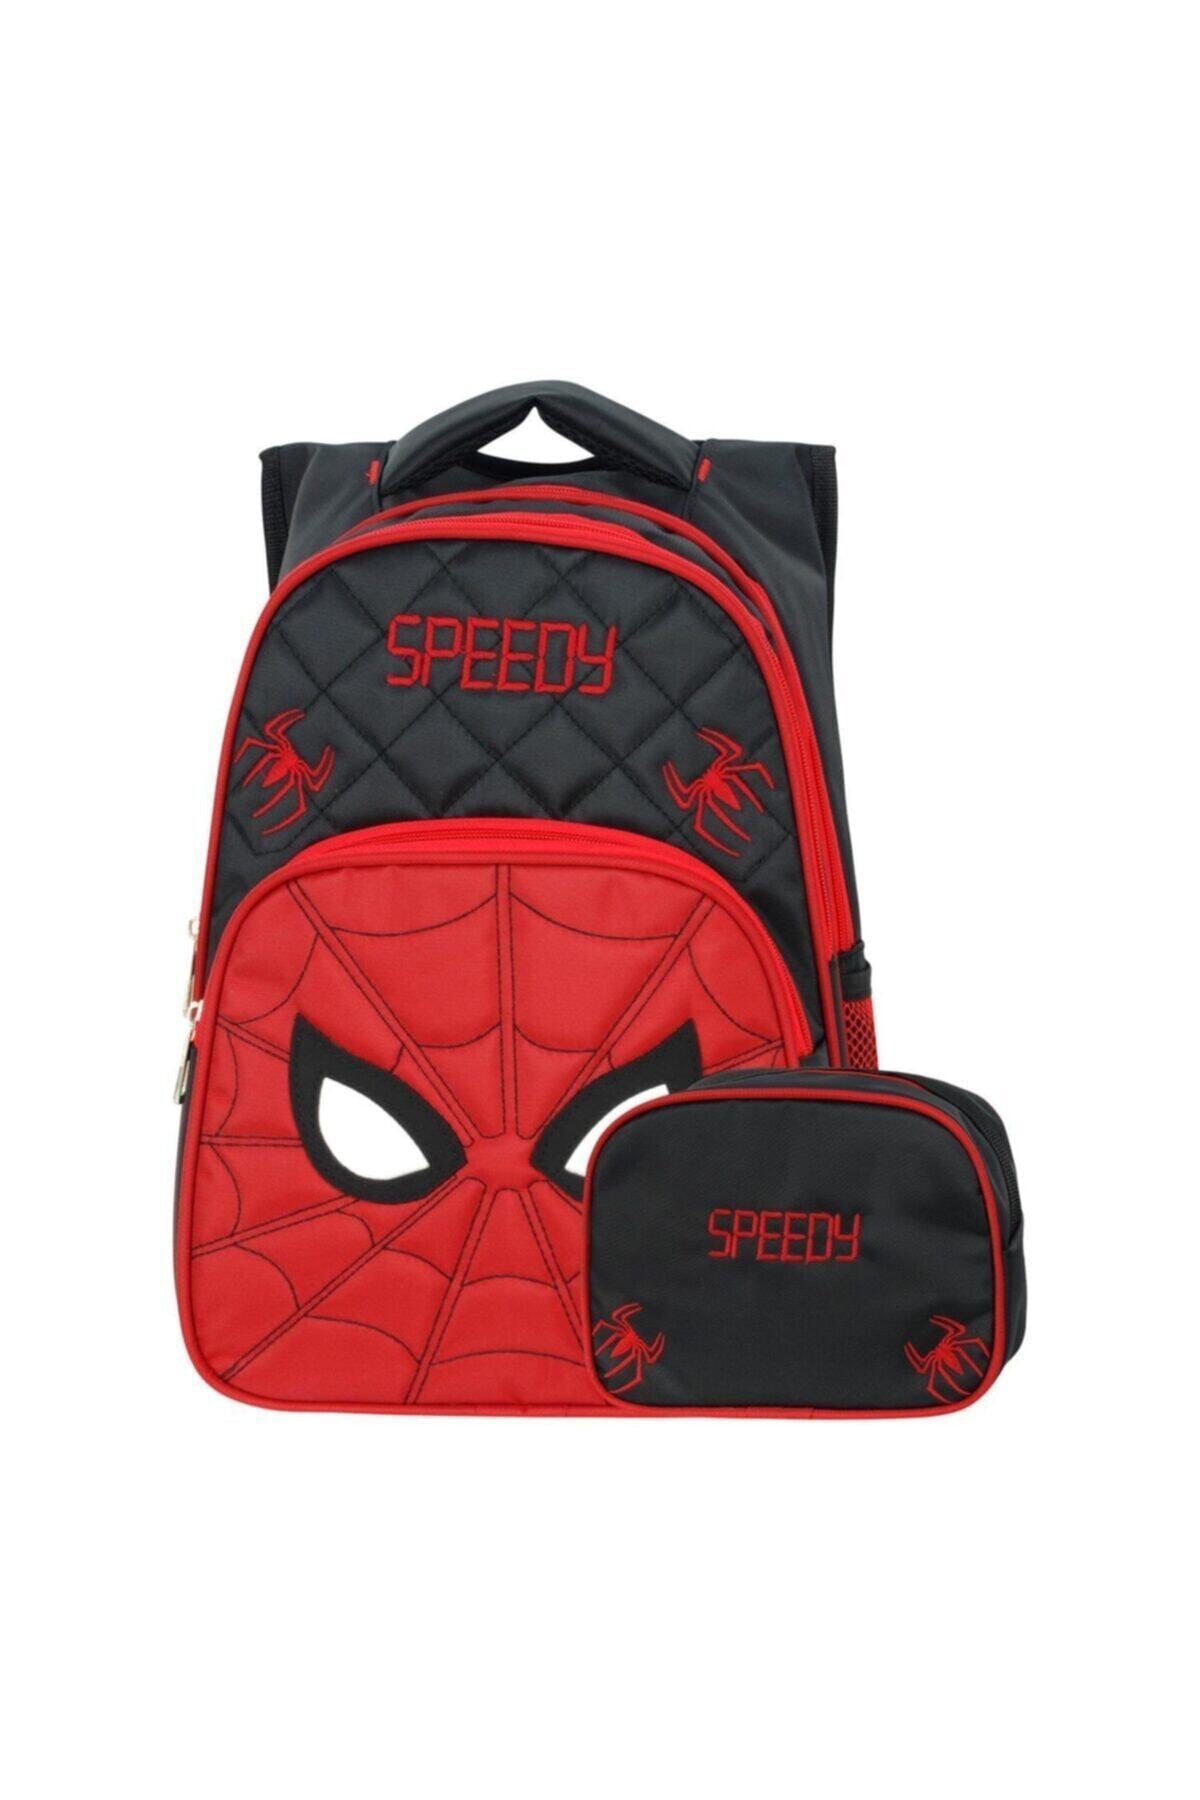 Spider Eye Orthopedic Primary School Bag With Lunch Box